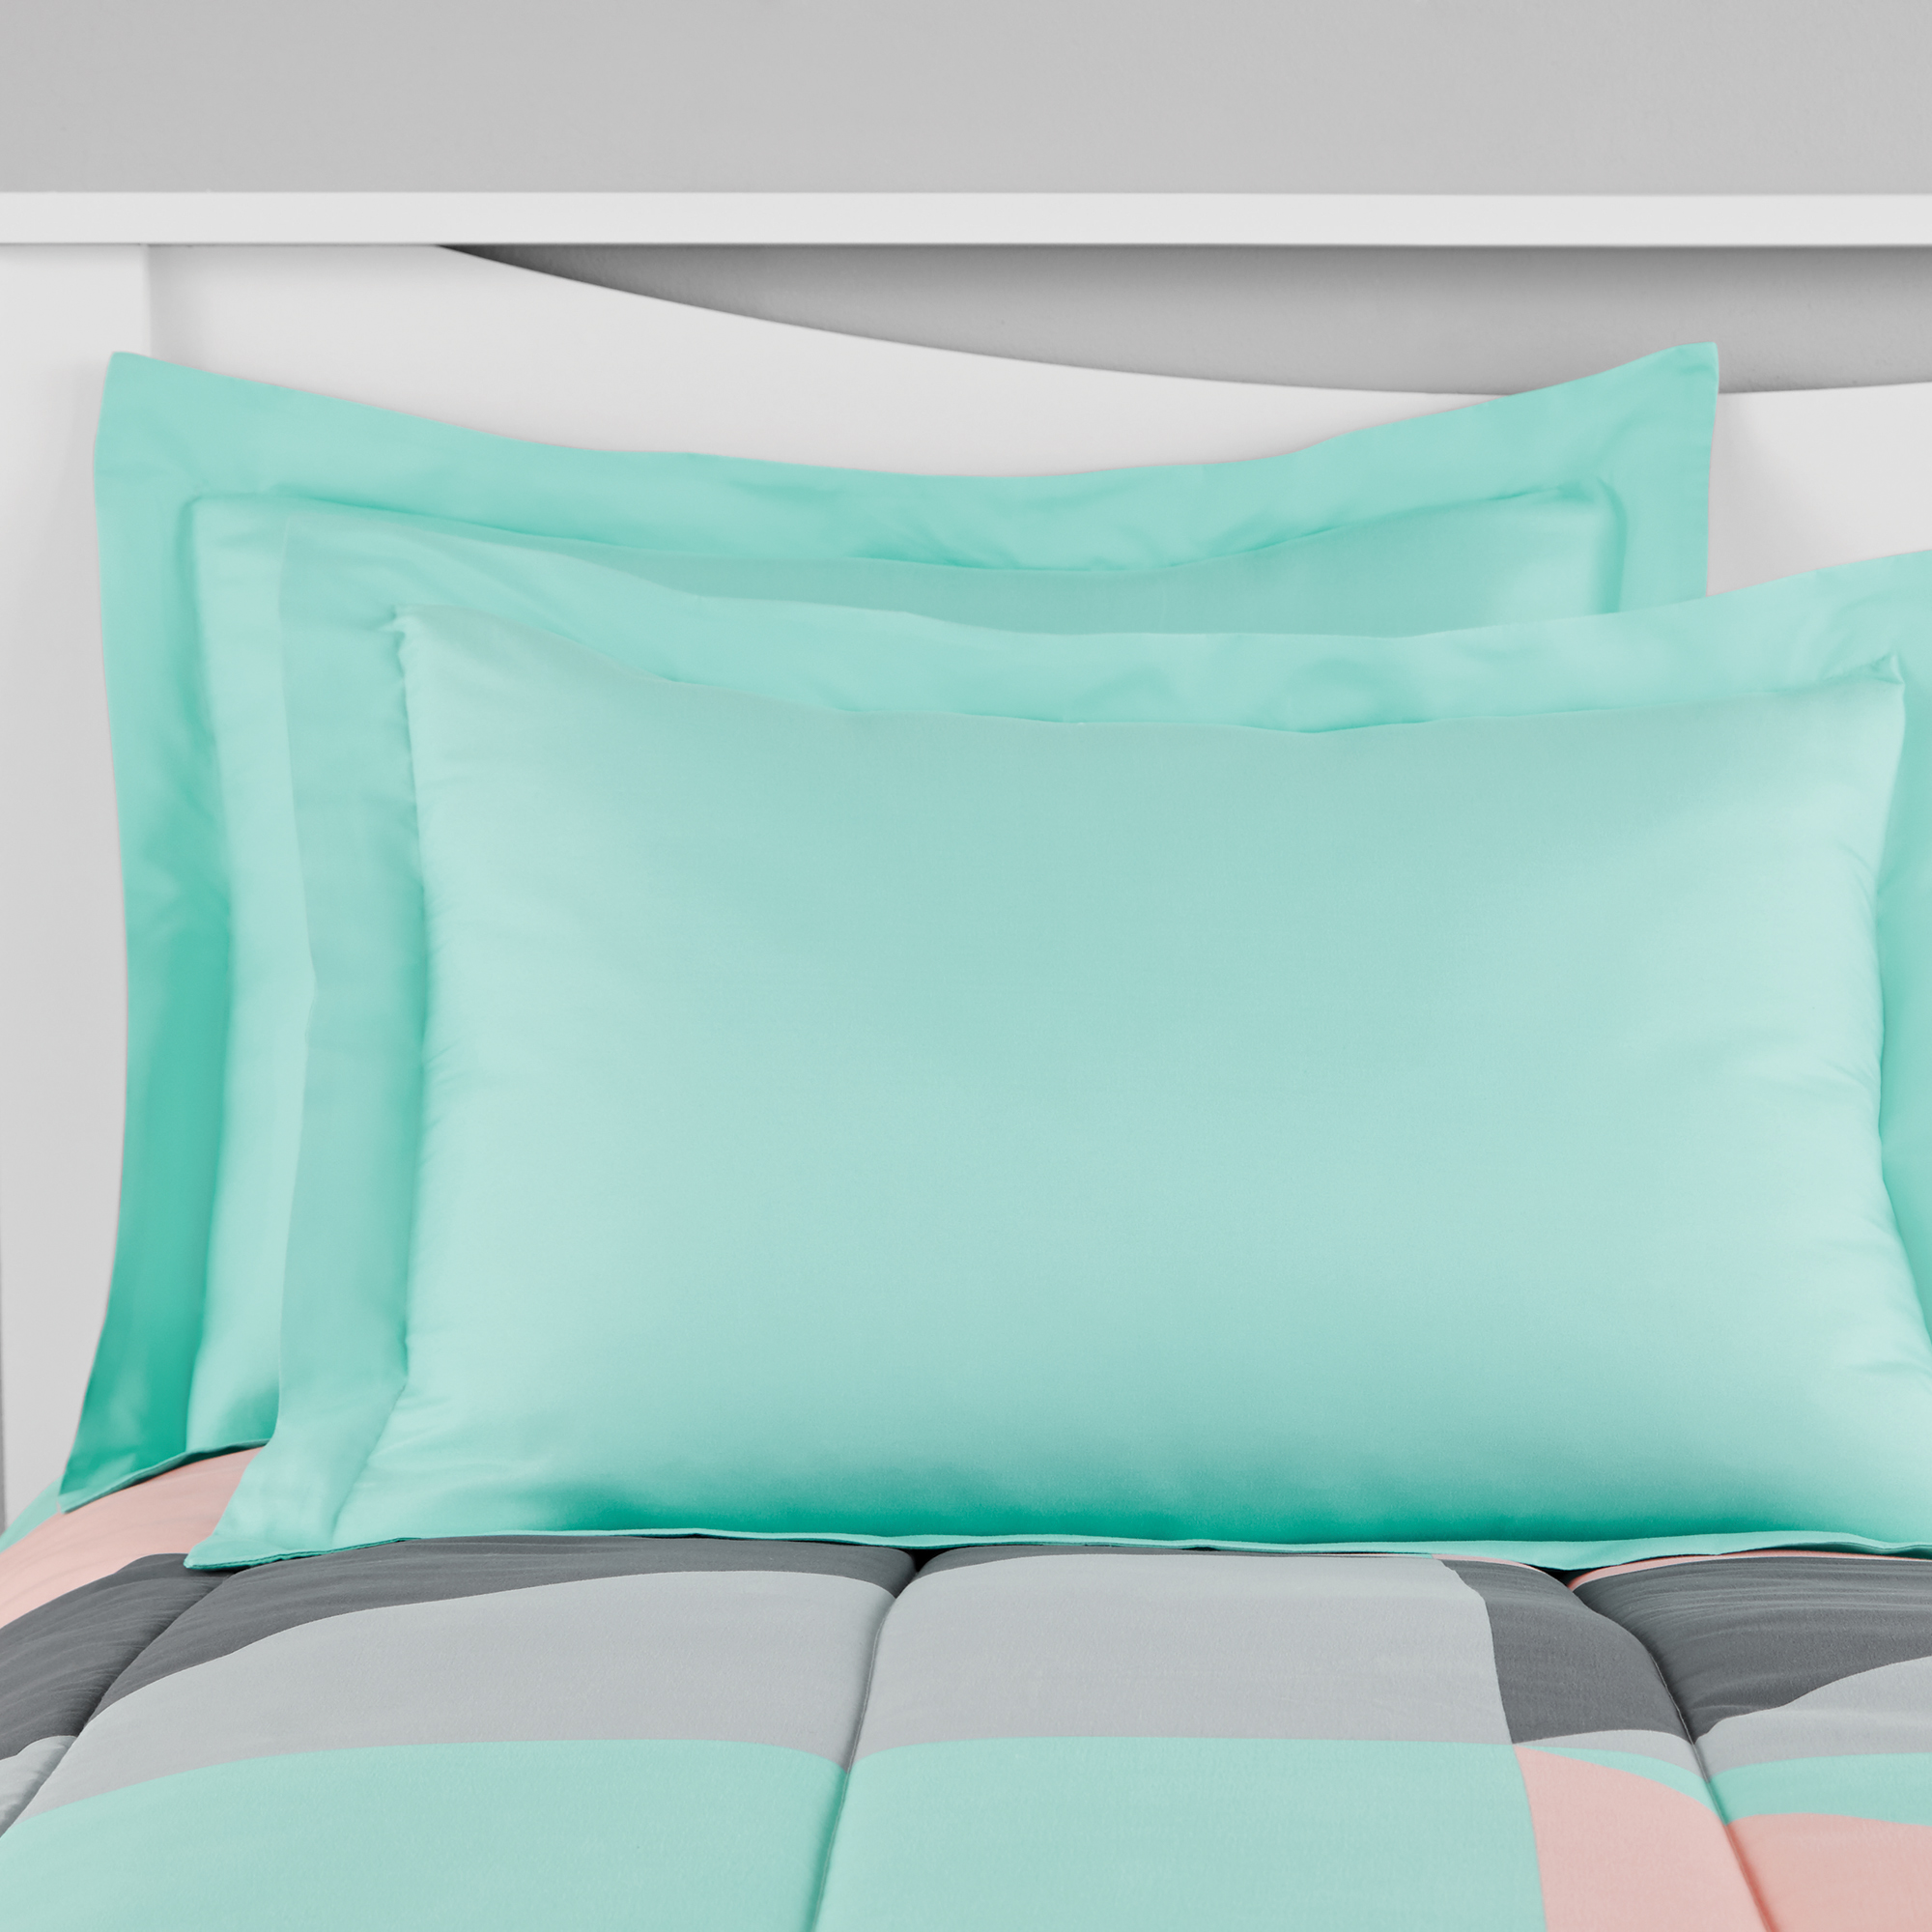 Mainstays Gray and Teal Geometric 8 Piece Bed in a Bag Comforter Set With Sheets, Queen - image 4 of 8